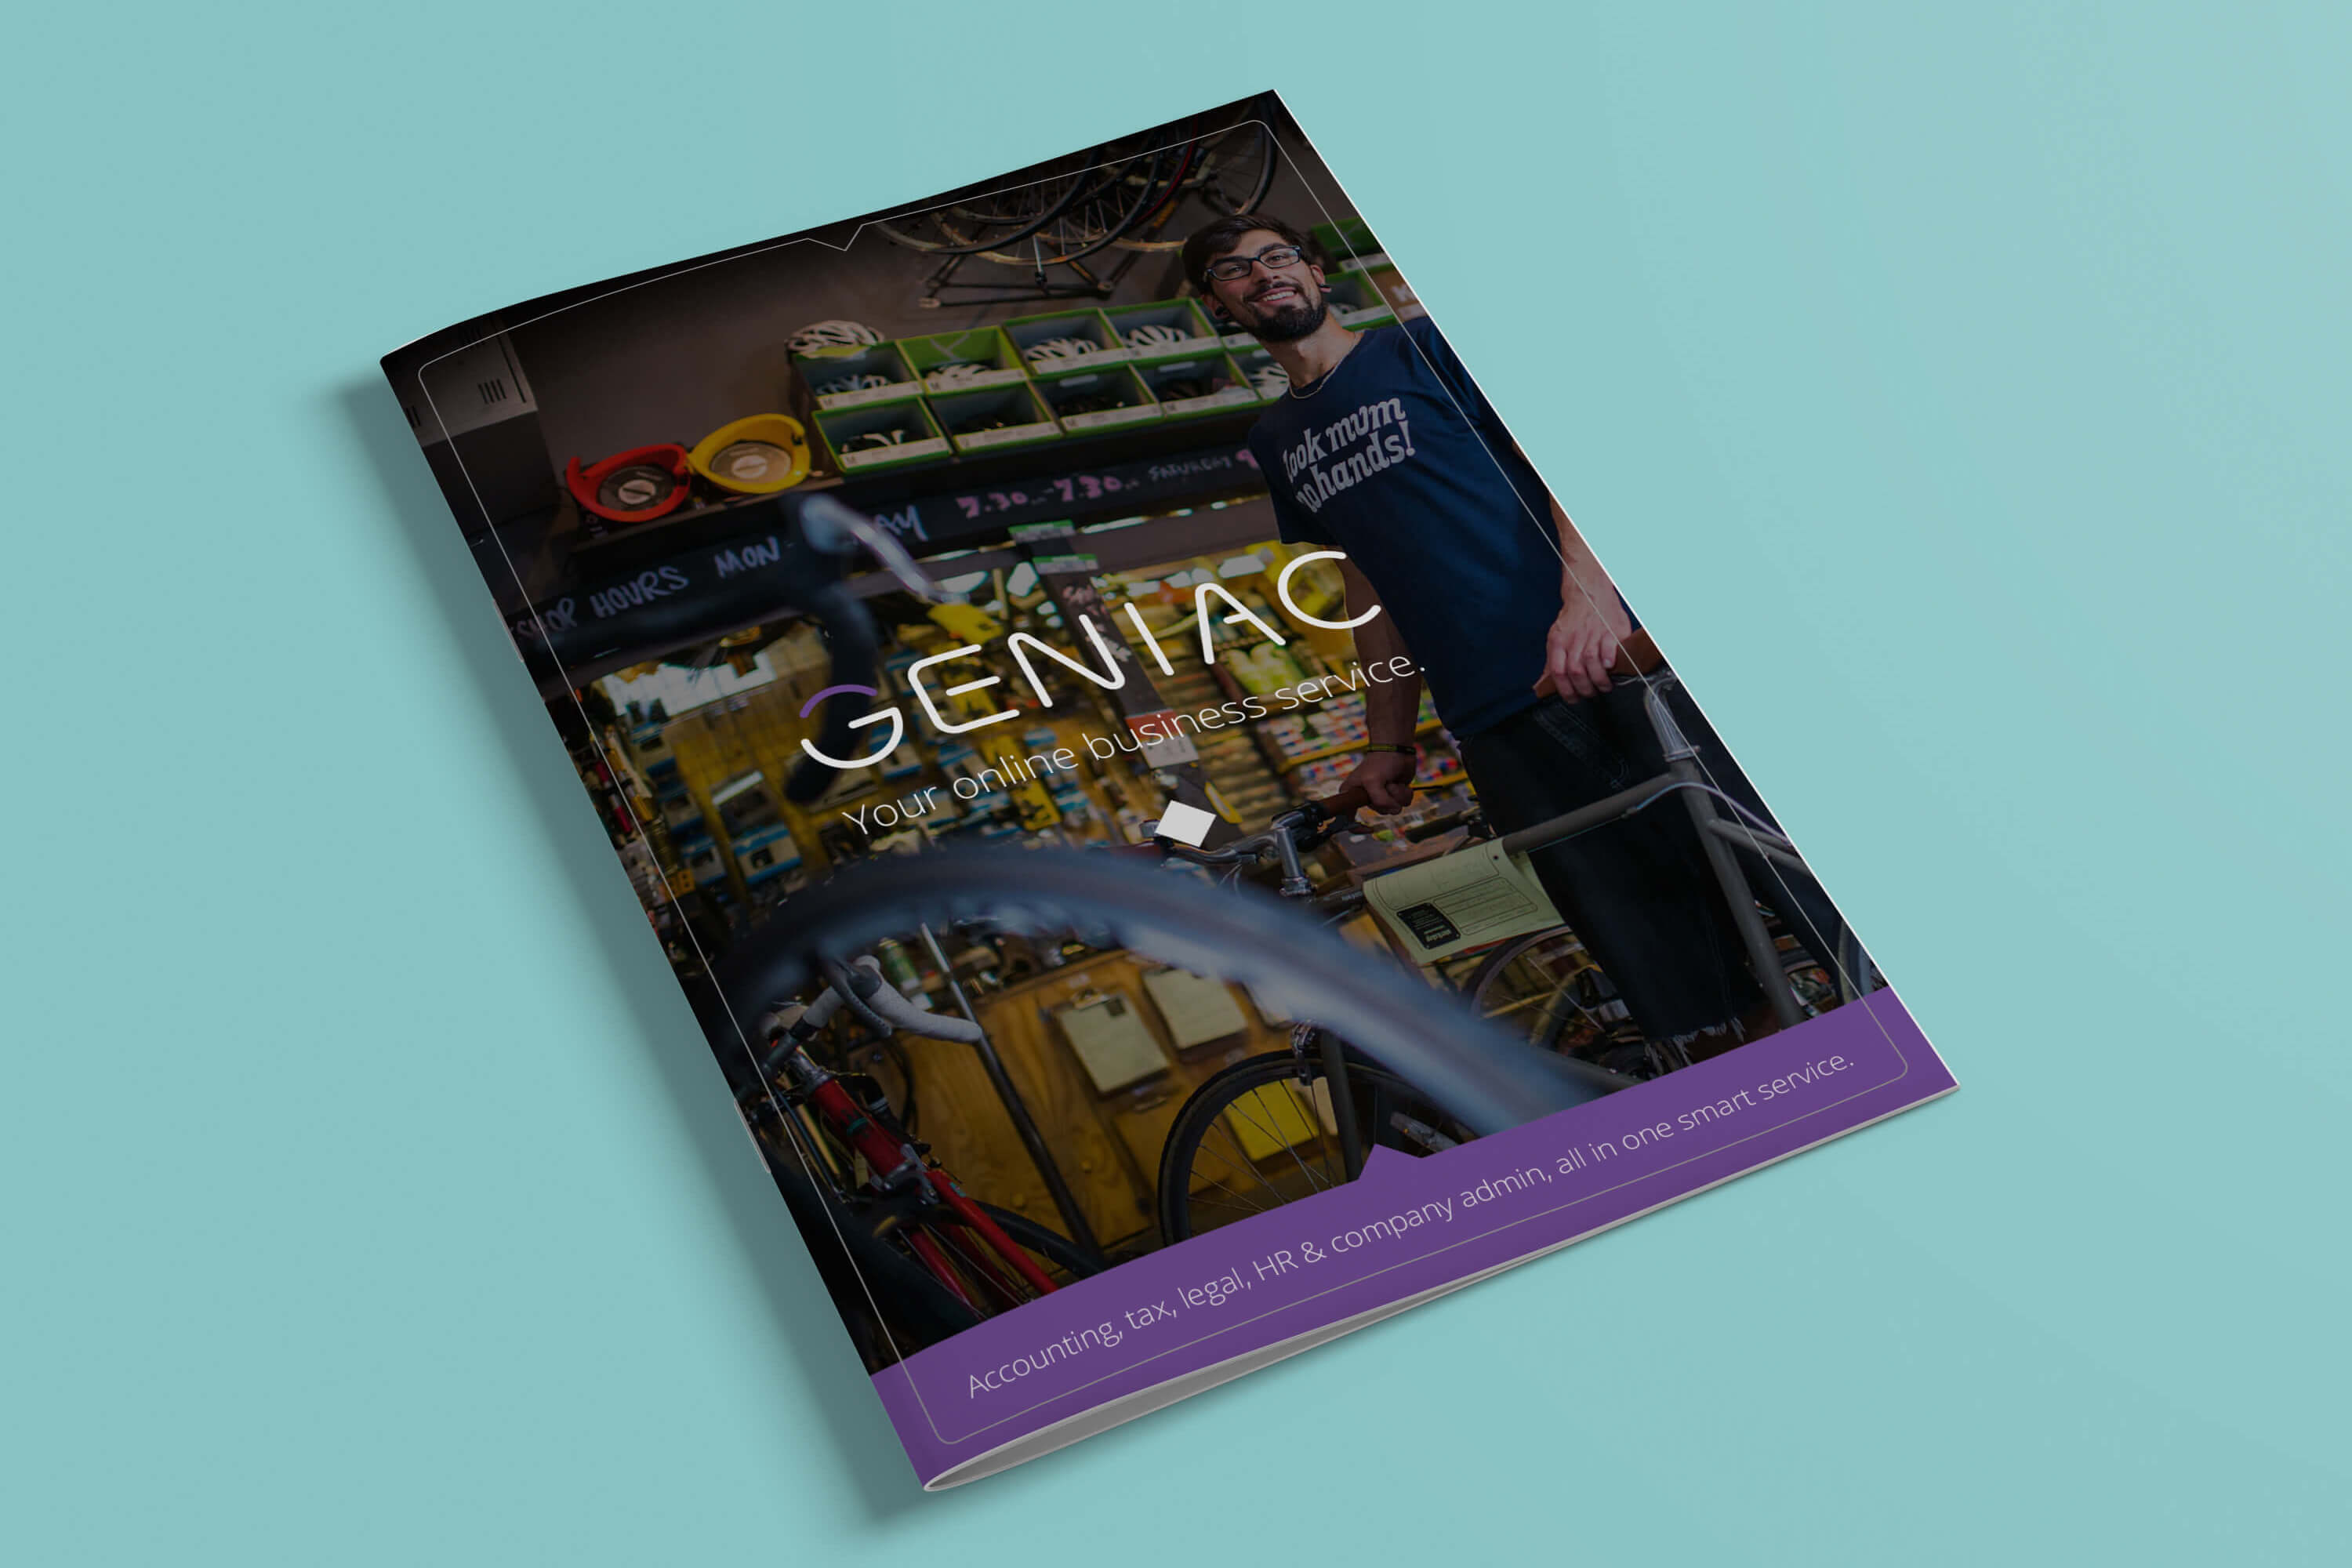 Geniac brochure displaying the front cover